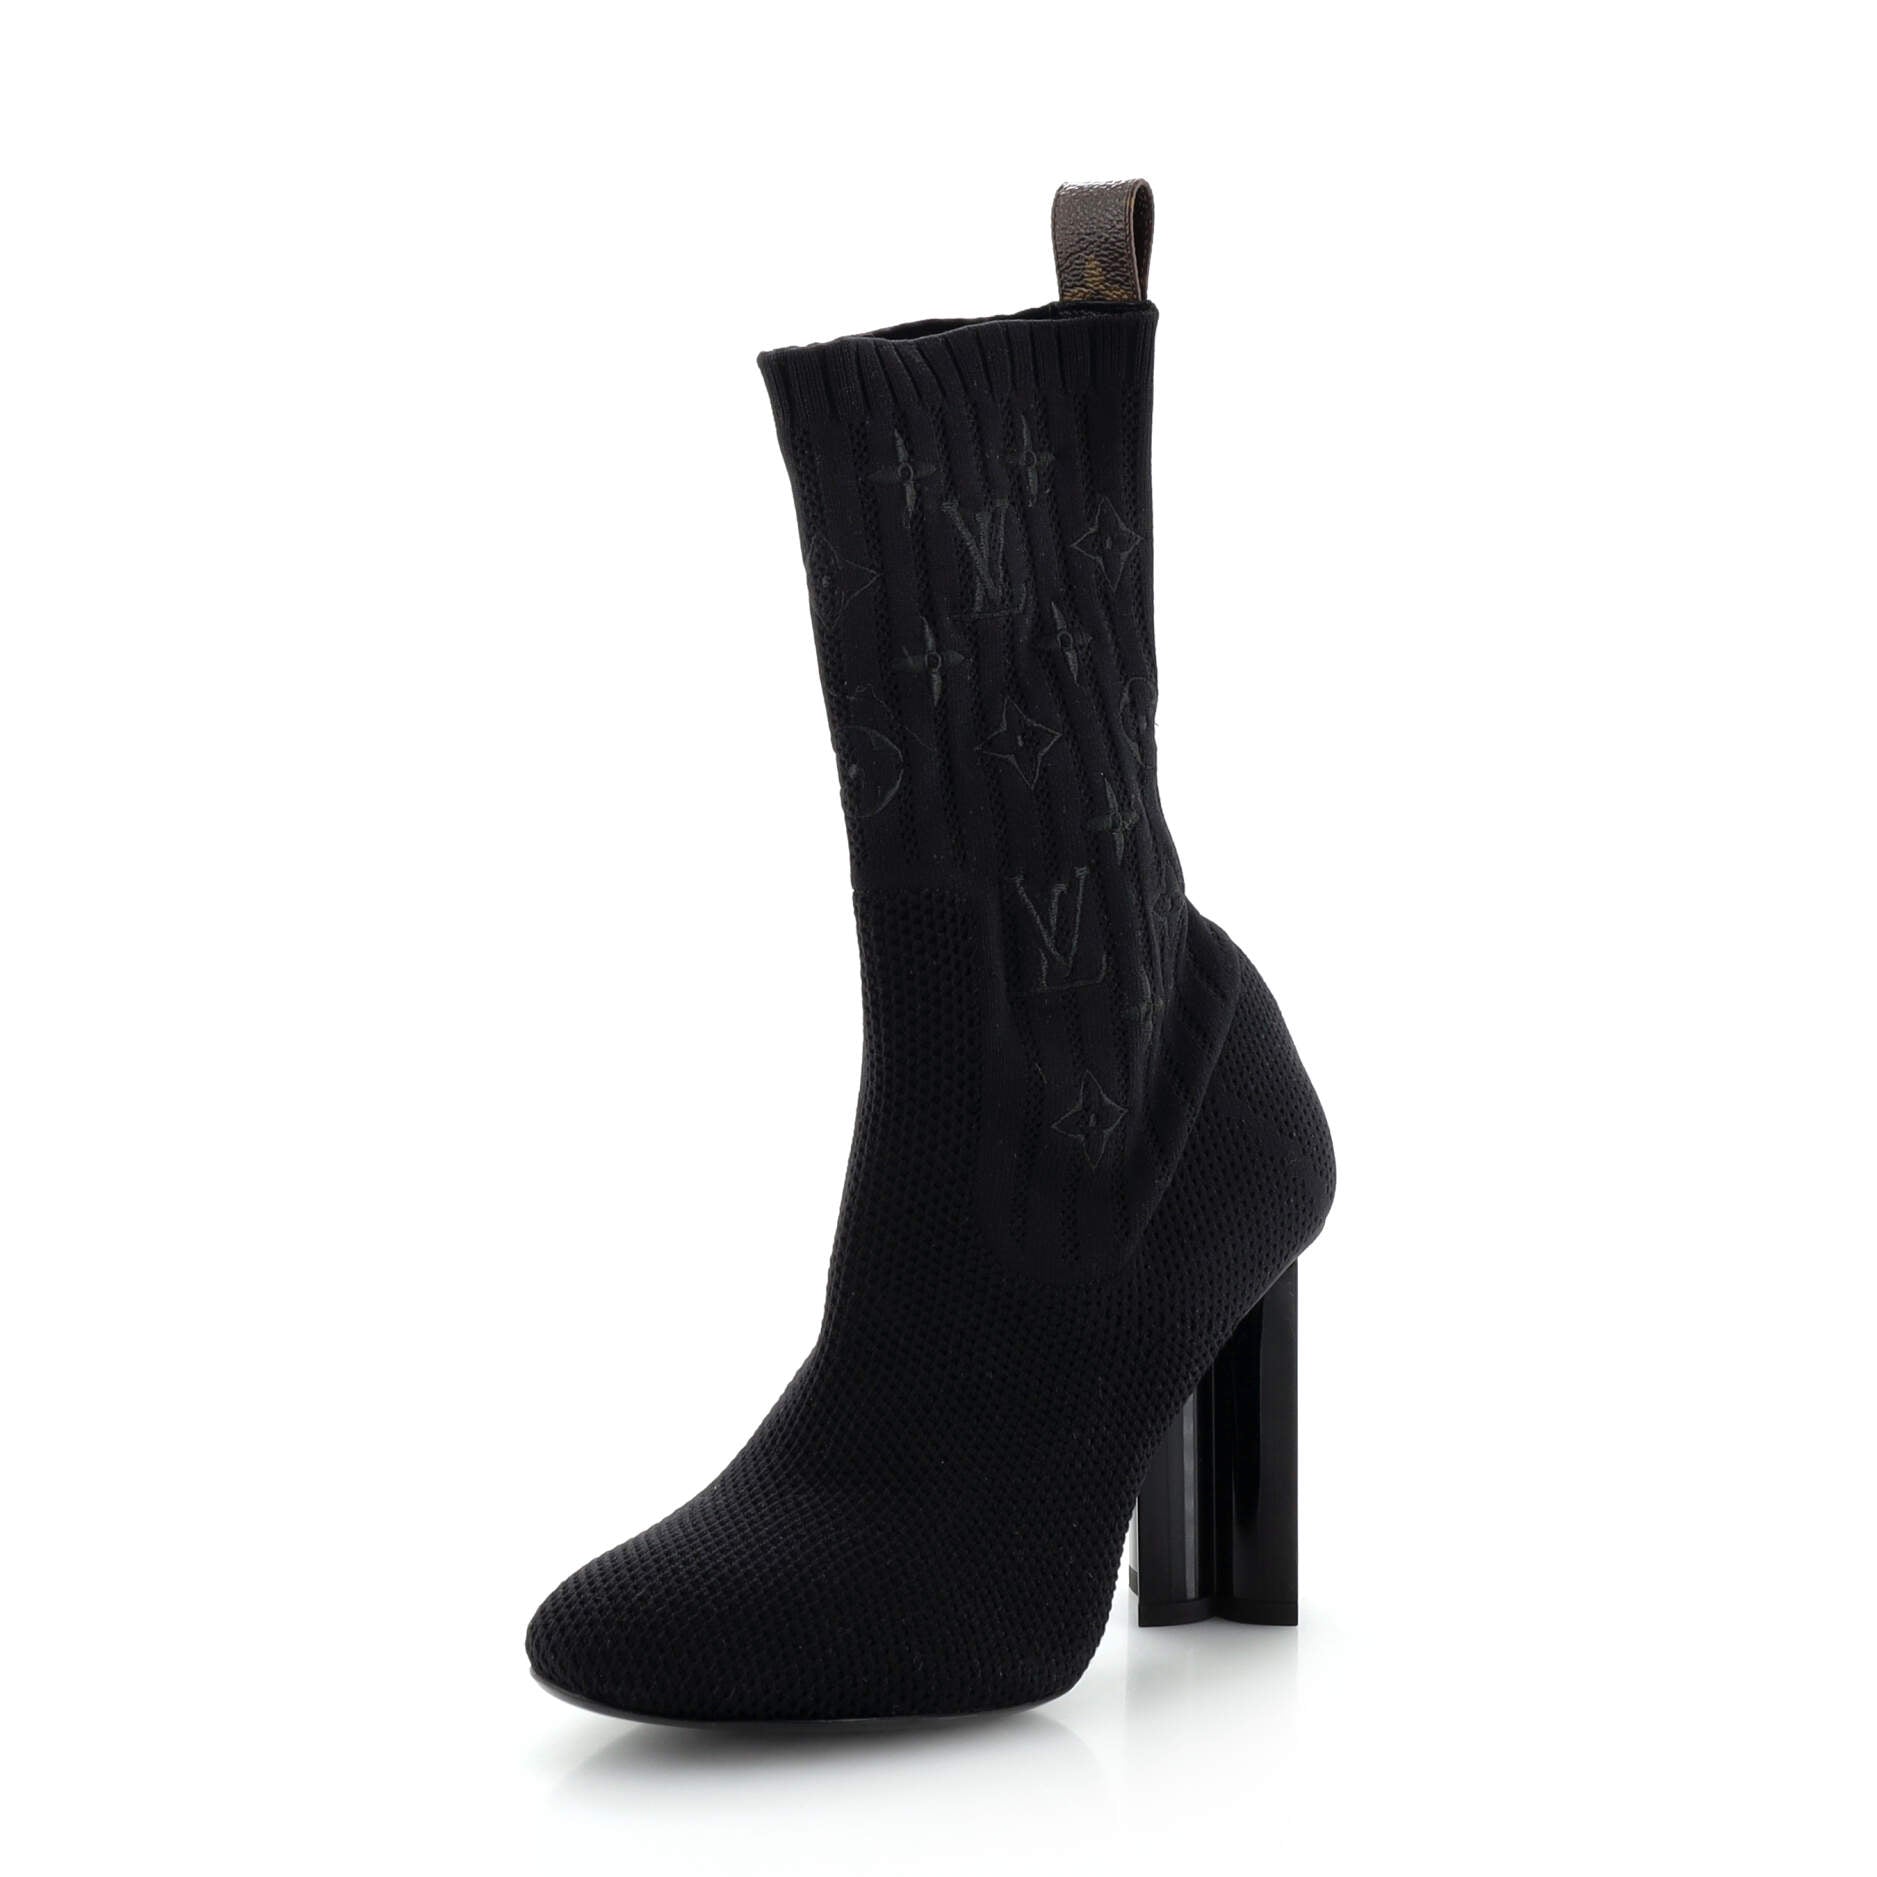 Women's Silhouette Ankle Boots Monogram Knit Fabric